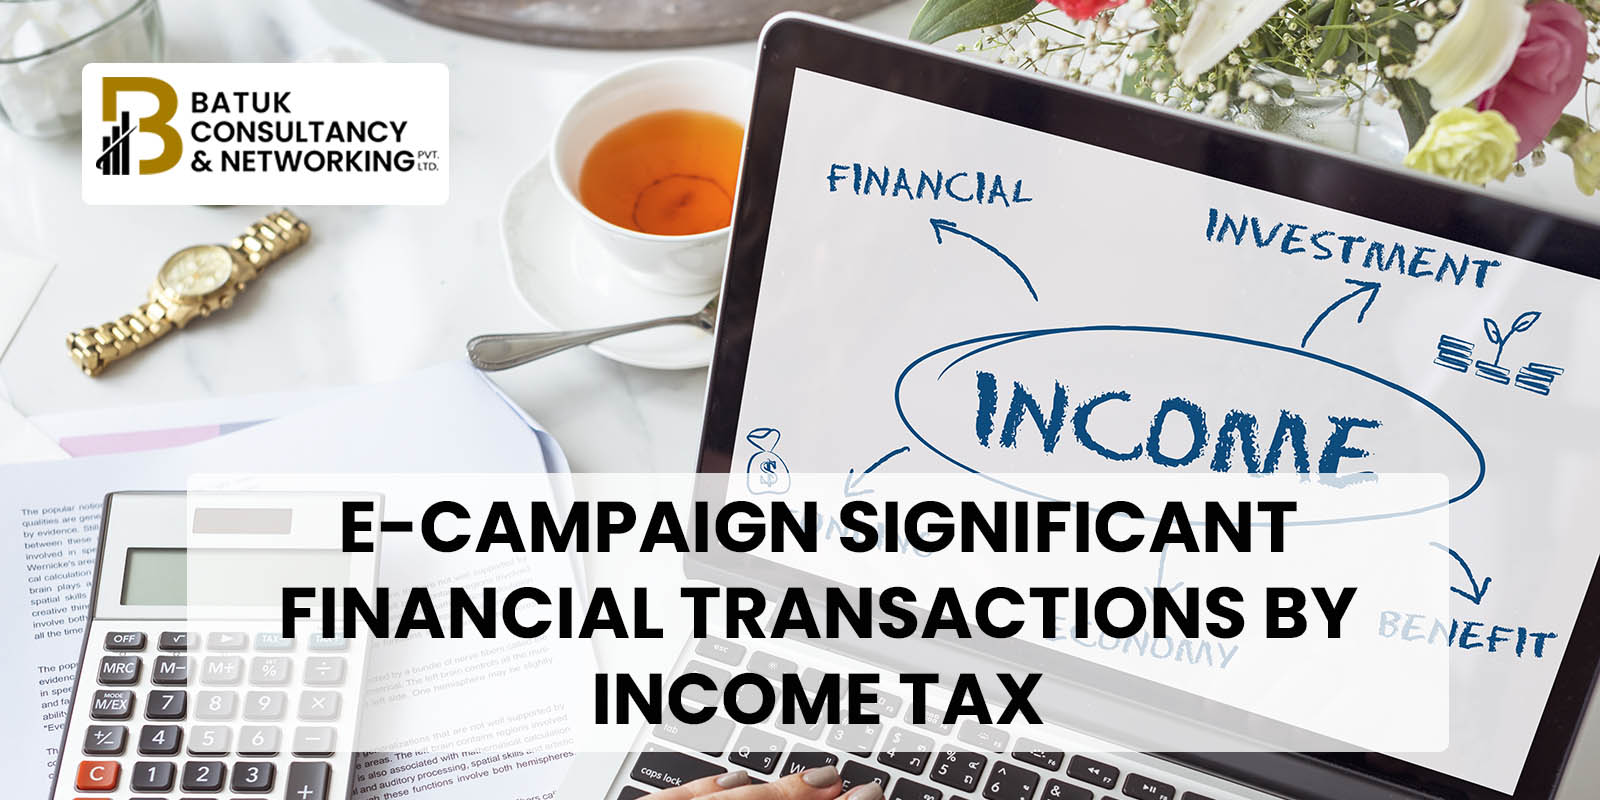 E-Campaign Significant Financial Transactions By Income Tax